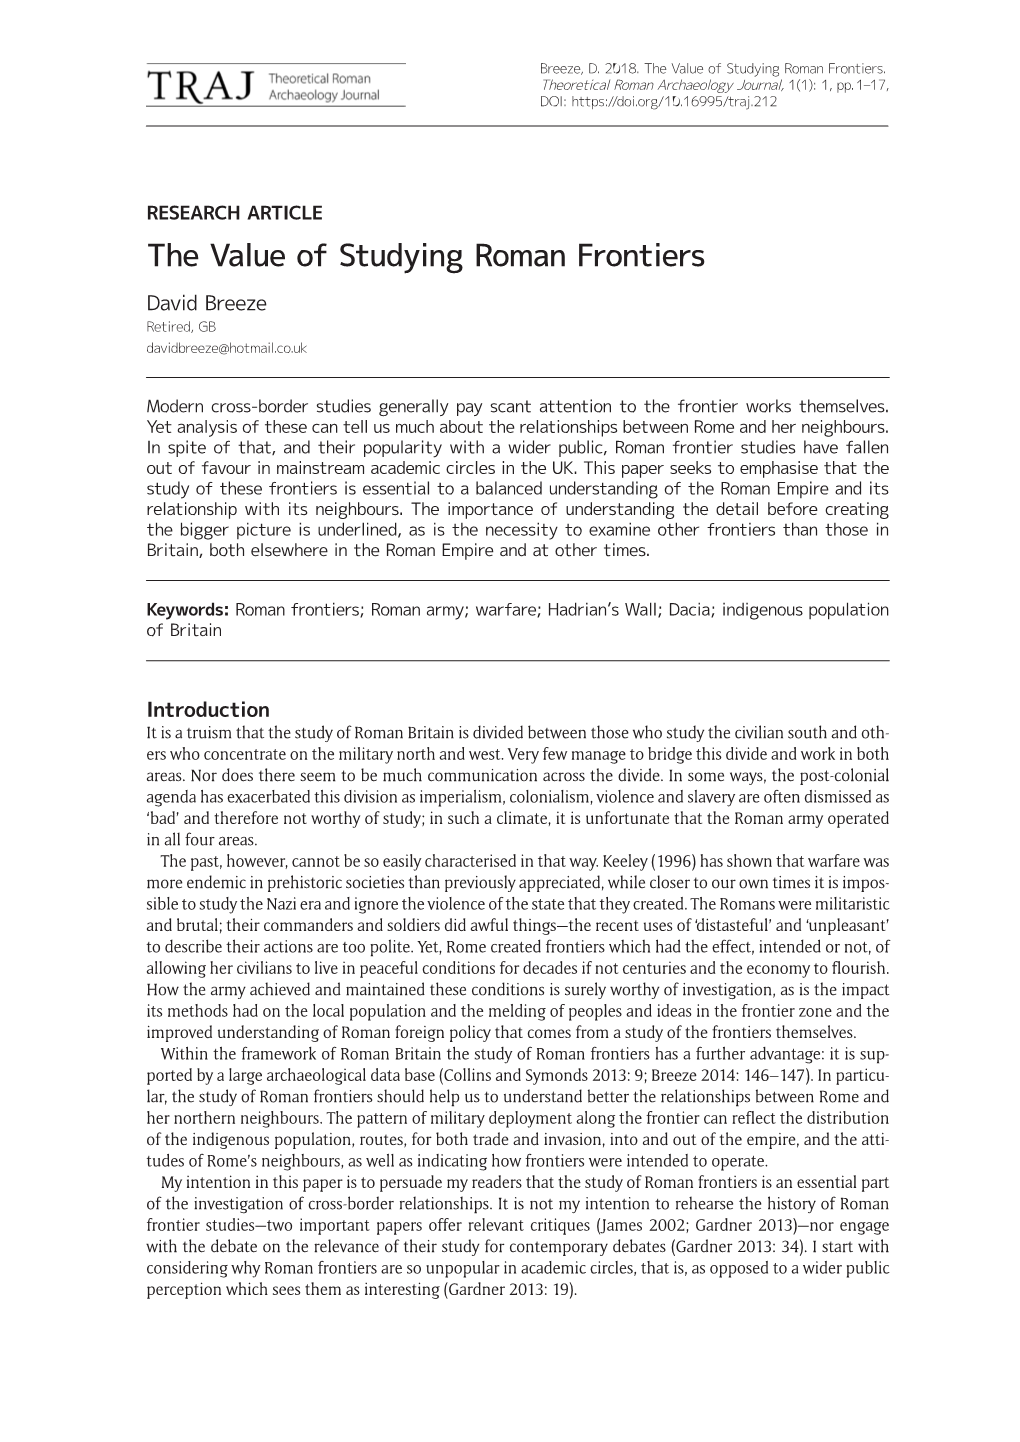 The Value of Studying Roman Frontiers